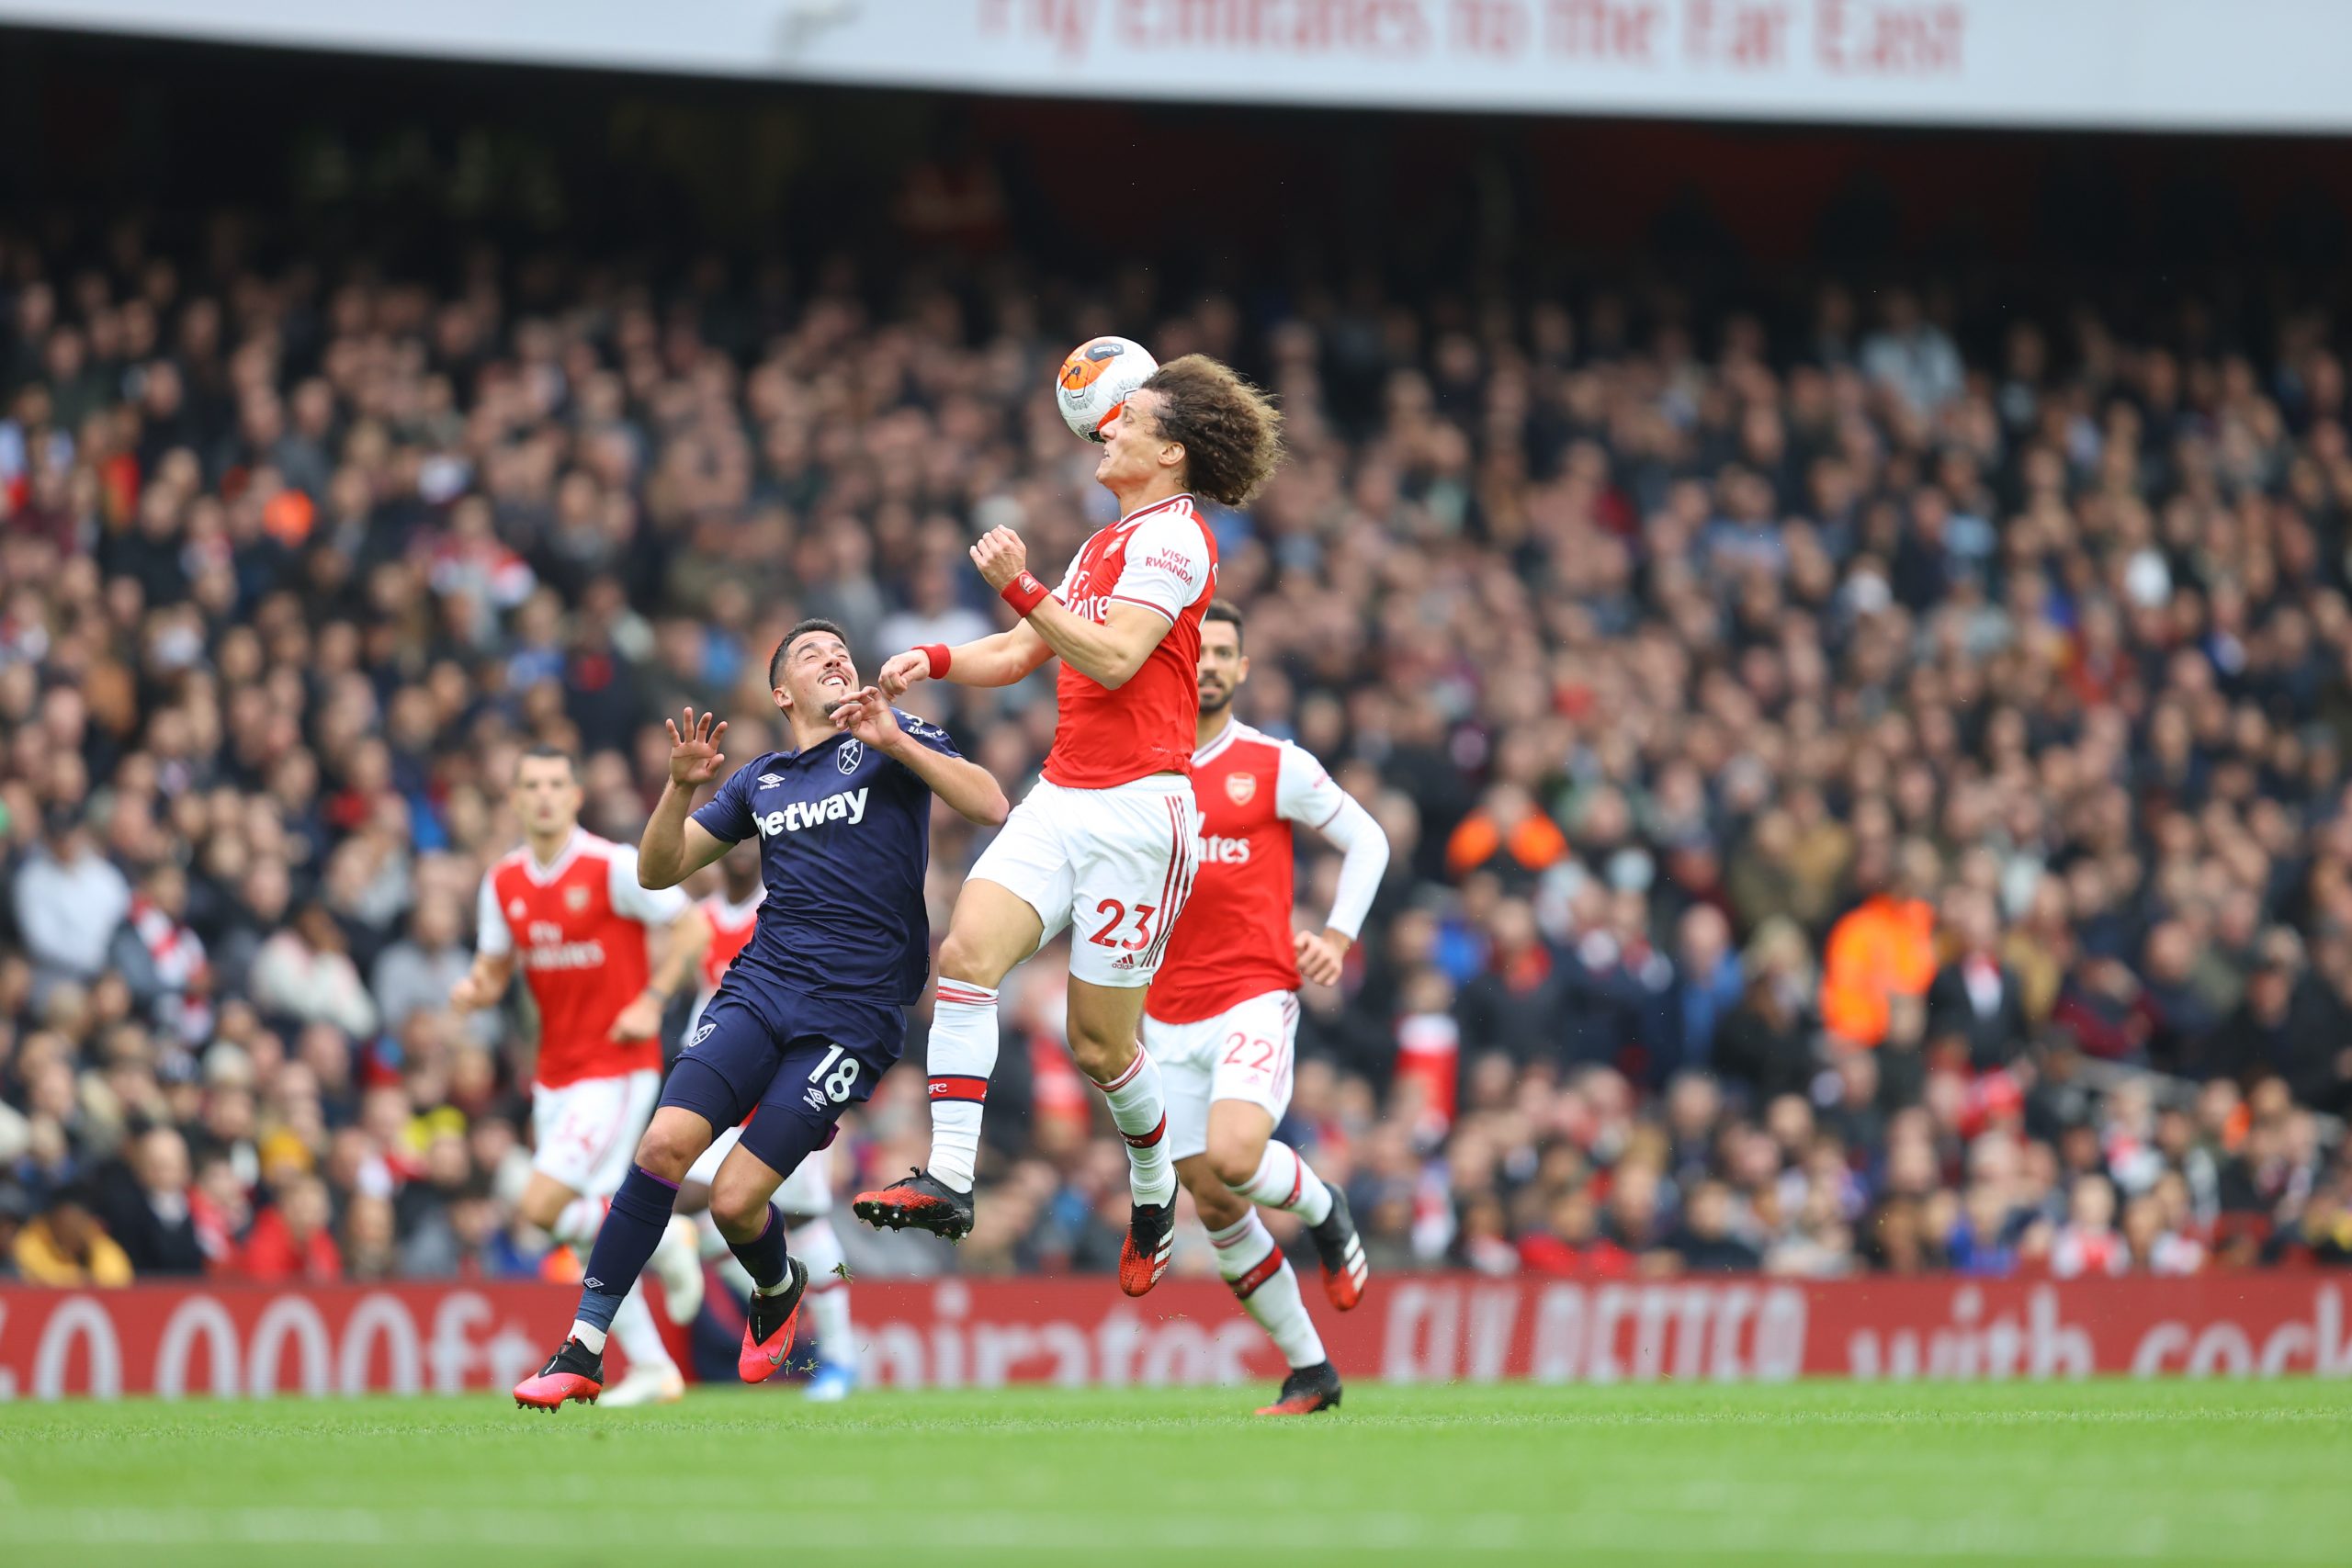 David Luiz of Arsenal wins a header over Pablo Fornals of West Ham United during the Premier League match between Arsenal FC and West Ham United at Emirates Stadium on March 07, 2020 in London, United Kingdom.